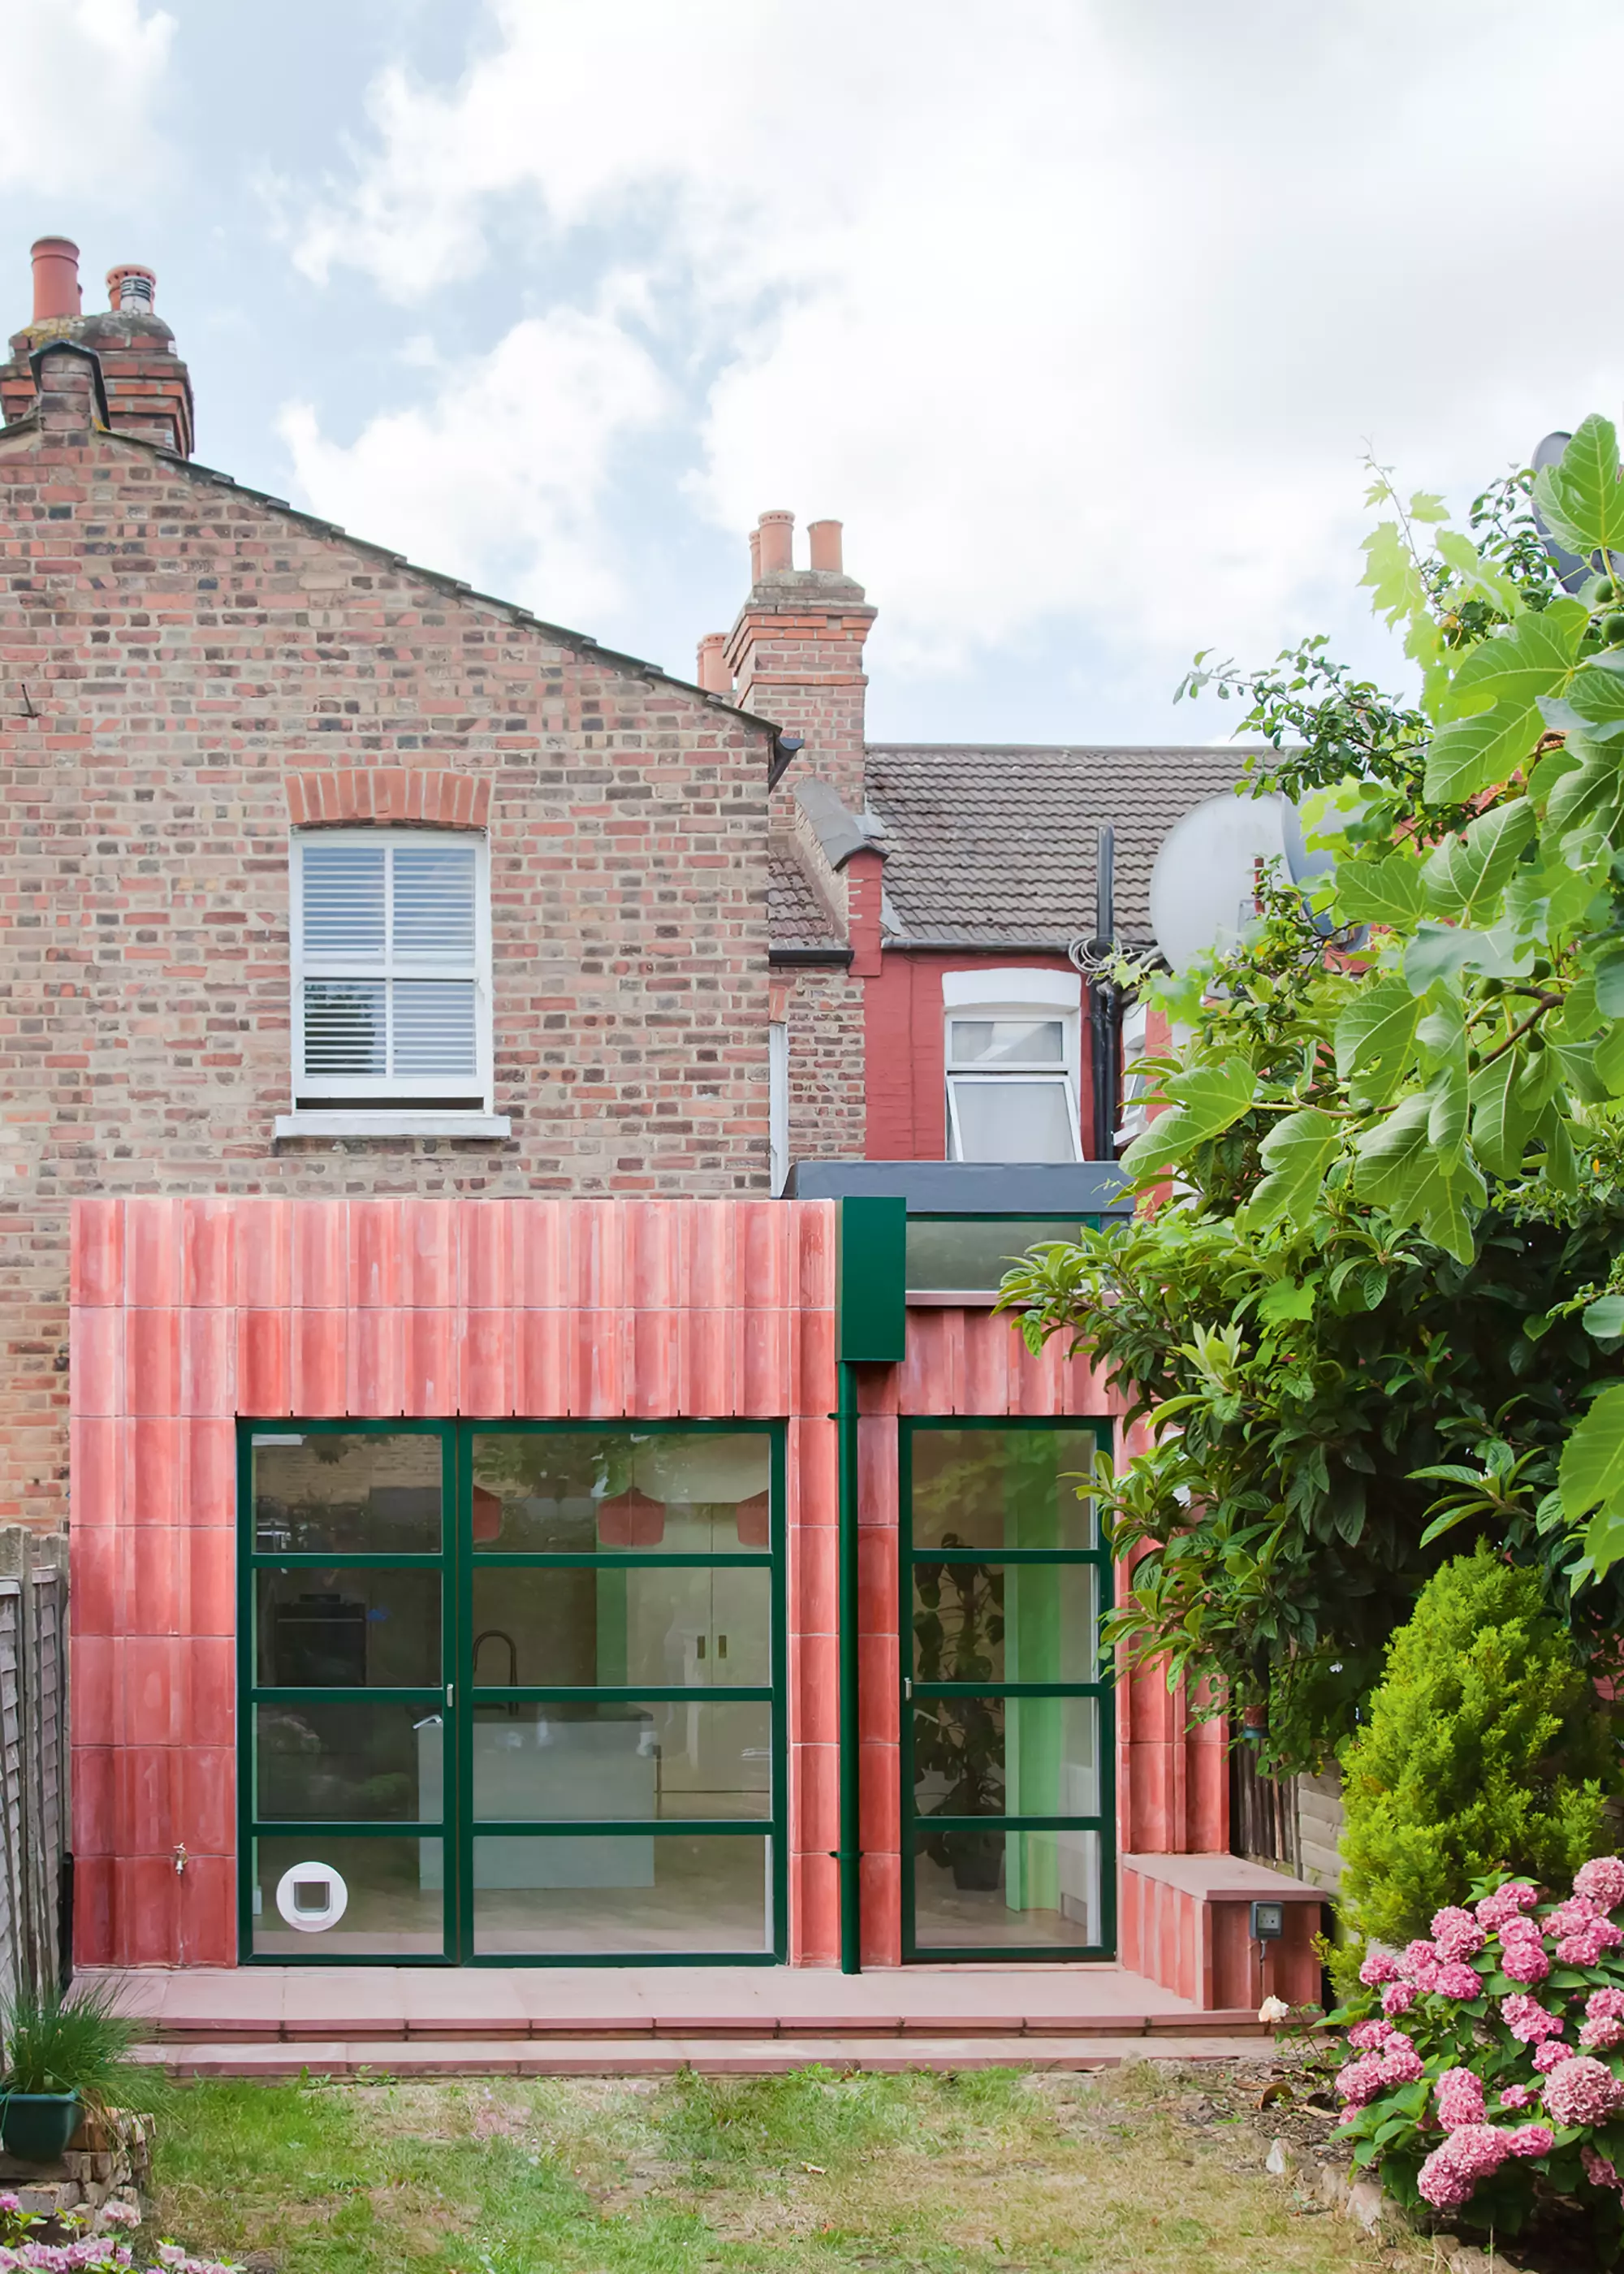 rear extension finished with red concrete blocks and glazing with dark green framing